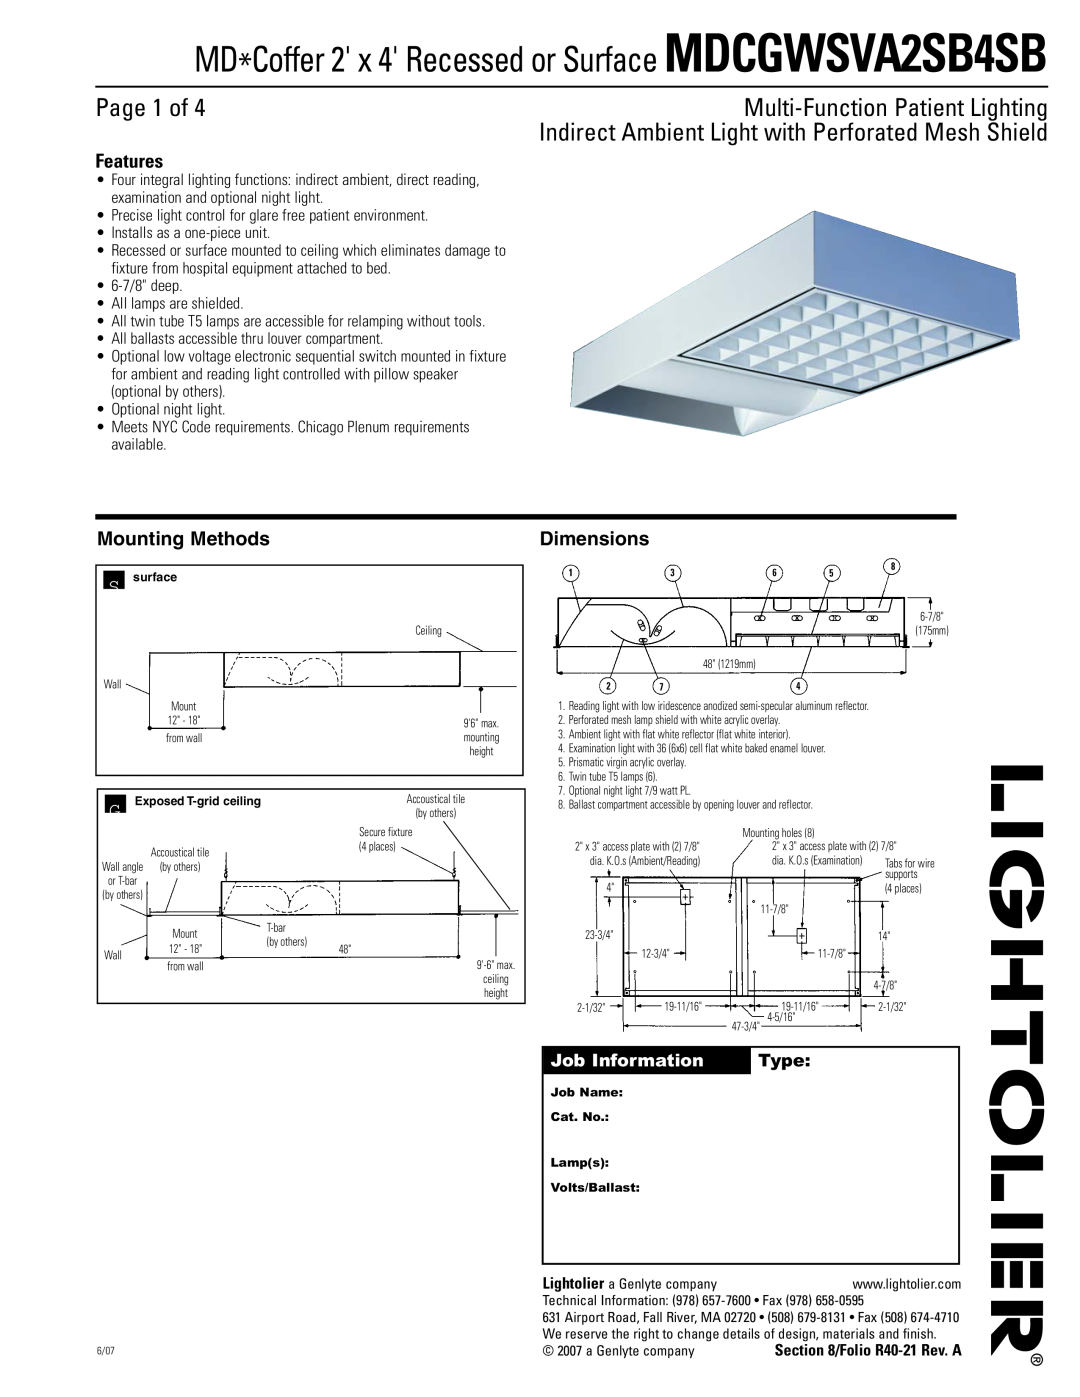 Lightolier MDCGWSVA2SB4SB dimensions Page 1 of, Multi-FunctionPatient Lighting, Features, Mounting Methods, Dimensions 